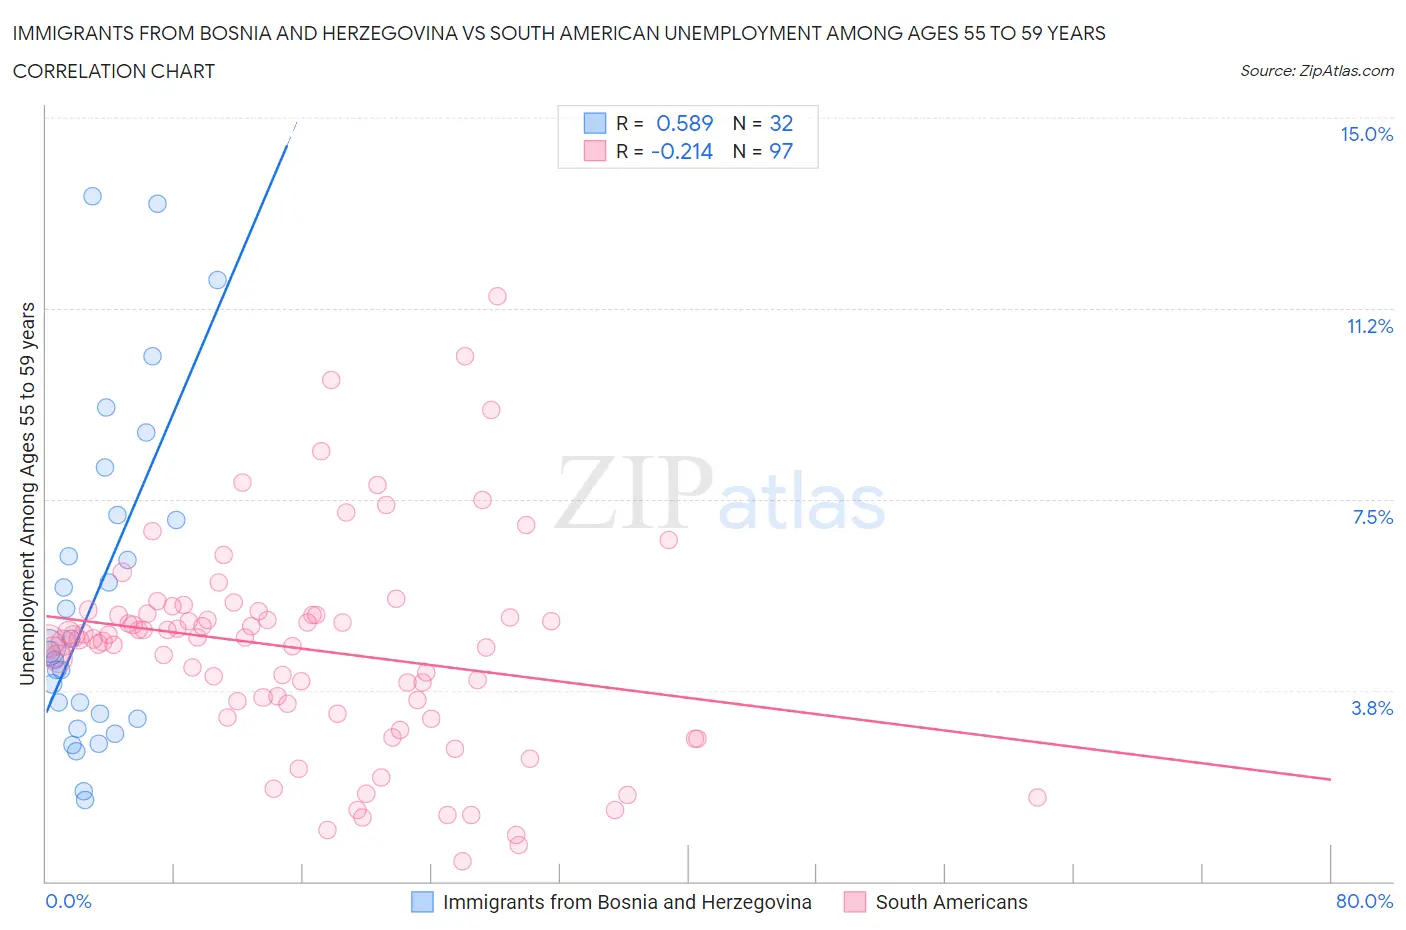 Immigrants from Bosnia and Herzegovina vs South American Unemployment Among Ages 55 to 59 years